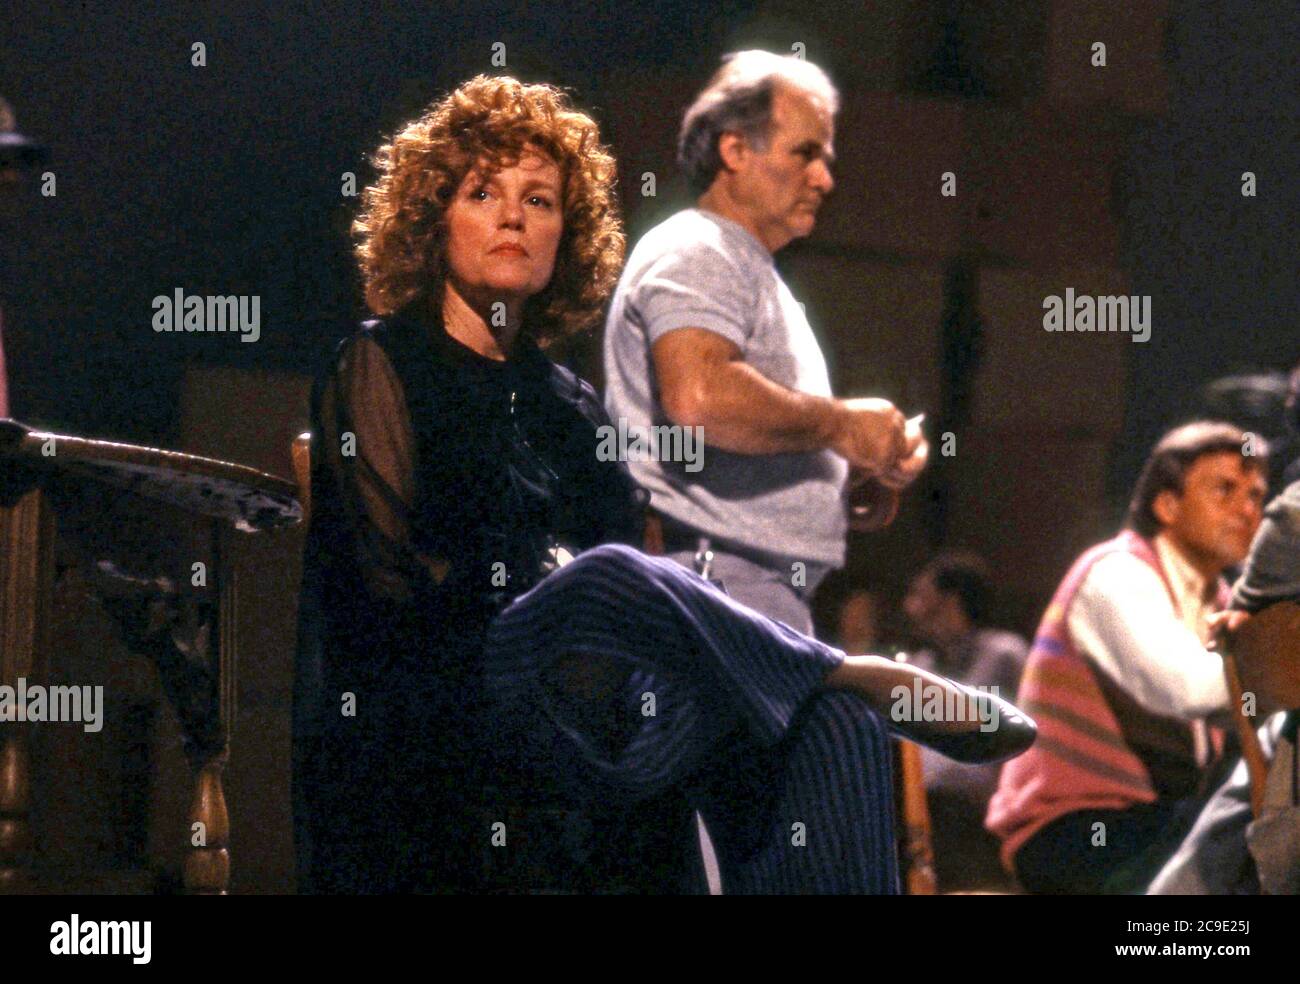 Madeline Kahn rehearsing a comic sketch based on a scene from the movie Blazing Saddles for Comic Relief benefit in Los Angeles, CA Stock Photo